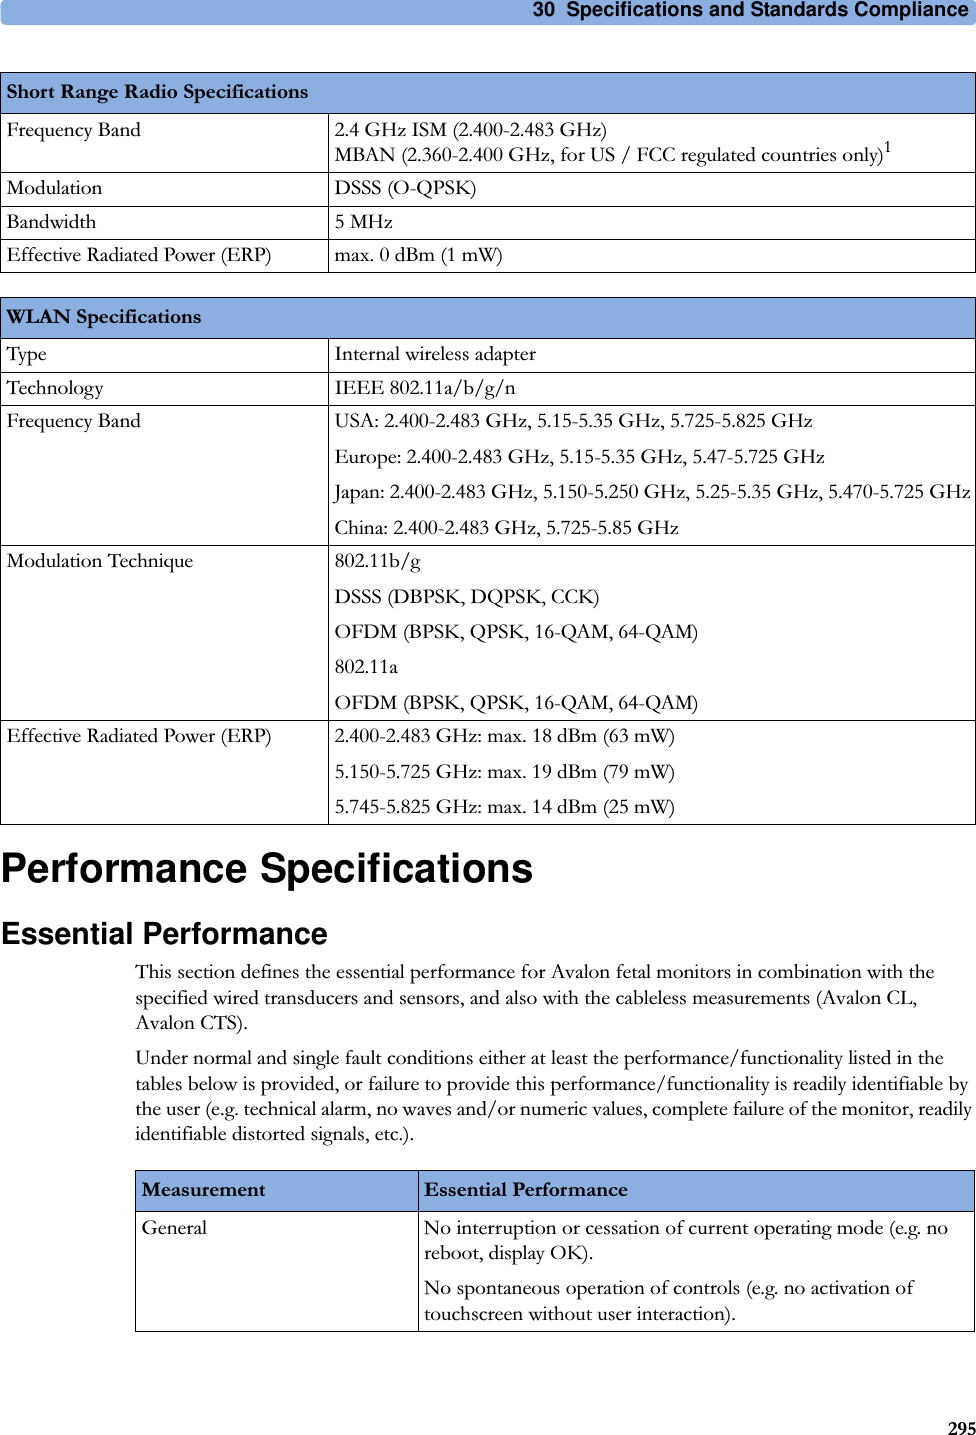 30  Specifications and Standards Compliance295Performance SpecificationsEssential PerformanceThis section defines the essential performance for Avalon fetal monitors in combination with the specified wired transducers and sensors, and also with the cableless measurements (Avalon CL, Avalon CTS).Under normal and single fault conditions either at least the performance/functionality listed in the tables below is provided, or failure to provide this performance/functionality is readily identifiable by the user (e.g. technical alarm, no waves and/or numeric values, complete failure of the monitor, readily identifiable distorted signals, etc.).Frequency Band 2.4 GHz ISM (2400-2483 GHz) MBAN (2360-2400 GHz, for US / FCC regulated countries only)1Modulation DSSS (O-QPSK)Bandwidth 5 MHzEffective Radiated Power (ERP) max. 0 dBm (1 mW)Short Range Radio SpecificationsWLAN SpecificationsType Internal wireless adapterTechnology IEEE 802.11a/b/g/nFrequency Band USA: 2.400-2.483 GHz, 5.15-5.35 GHz, 5.725-5.825 GHzEurope: 2.400-2.483 GHz, 5.15-5.35 GHz, 5.47-5.725 GHzJapan: 2.400-2.483 GHz, 5.150-5.250 GHz, 5.25-5.35 GHz, 5.470-5.725 GHzChina: 2.400-2.483 GHz, 5.725-5.85 GHzModulation Technique 802.11b/gDSSS (DBPSK, DQPSK, CCK)OFDM (BPSK, QPSK, 16-QAM, 64-QAM)802.11aOFDM (BPSK, QPSK, 16-QAM, 64-QAM)Effective Radiated Power (ERP) 2.400-2.483 GHz: max. 18 dBm (63 mW)5.150-5.725 GHz: max. 19 dBm (79 mW)5.745-5.825 GHz: max. 14 dBm (25 mW)Measurement Essential PerformanceGeneral No interruption or cessation of current operating mode (e.g. no reboot, display OK).No spontaneous operation of controls (e.g. no activation of touchscreen without user interaction).